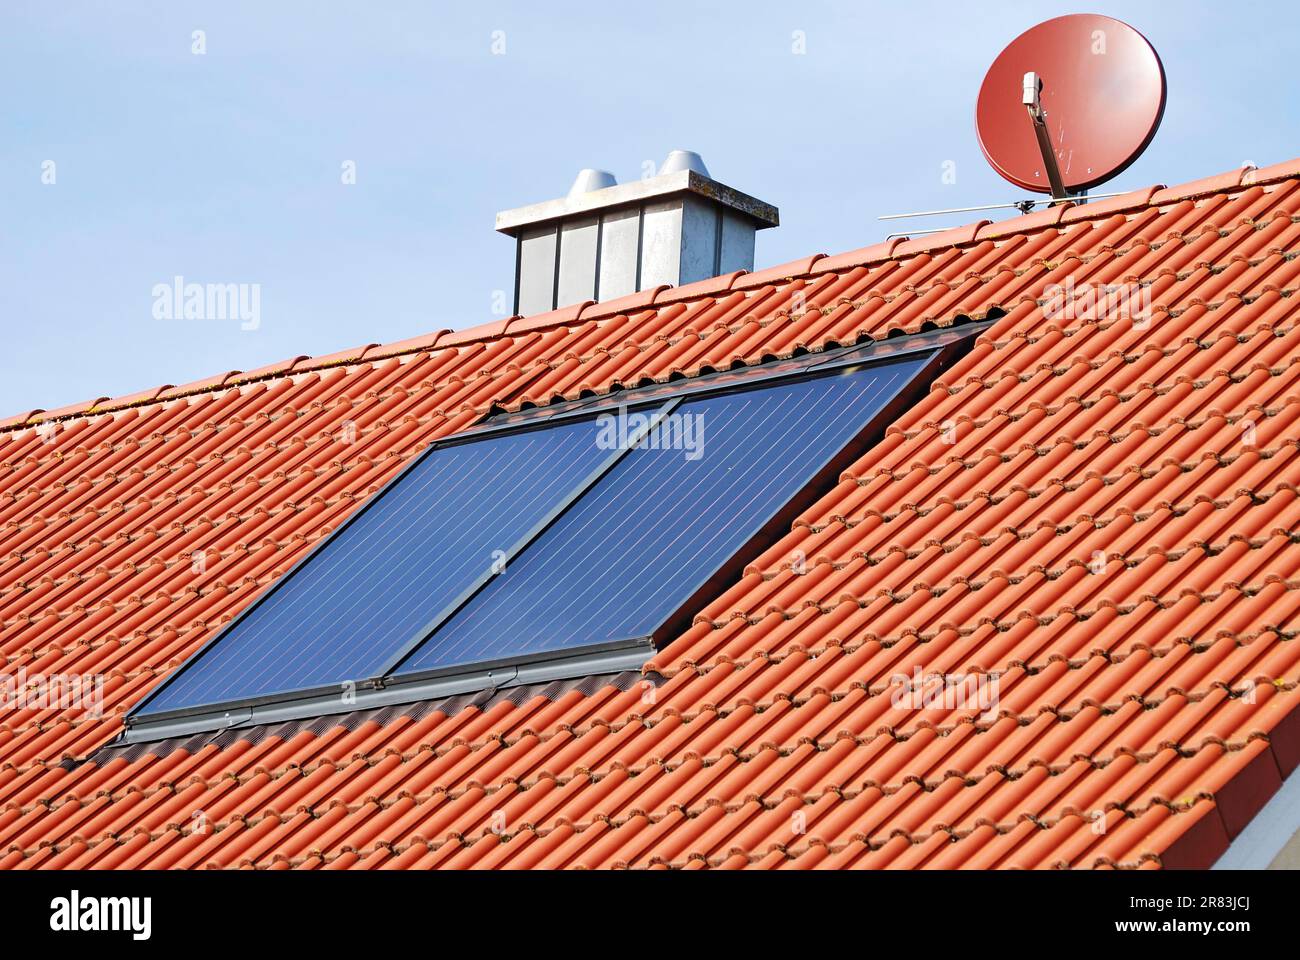 Solar heating system on the roof of a house Stock Photo